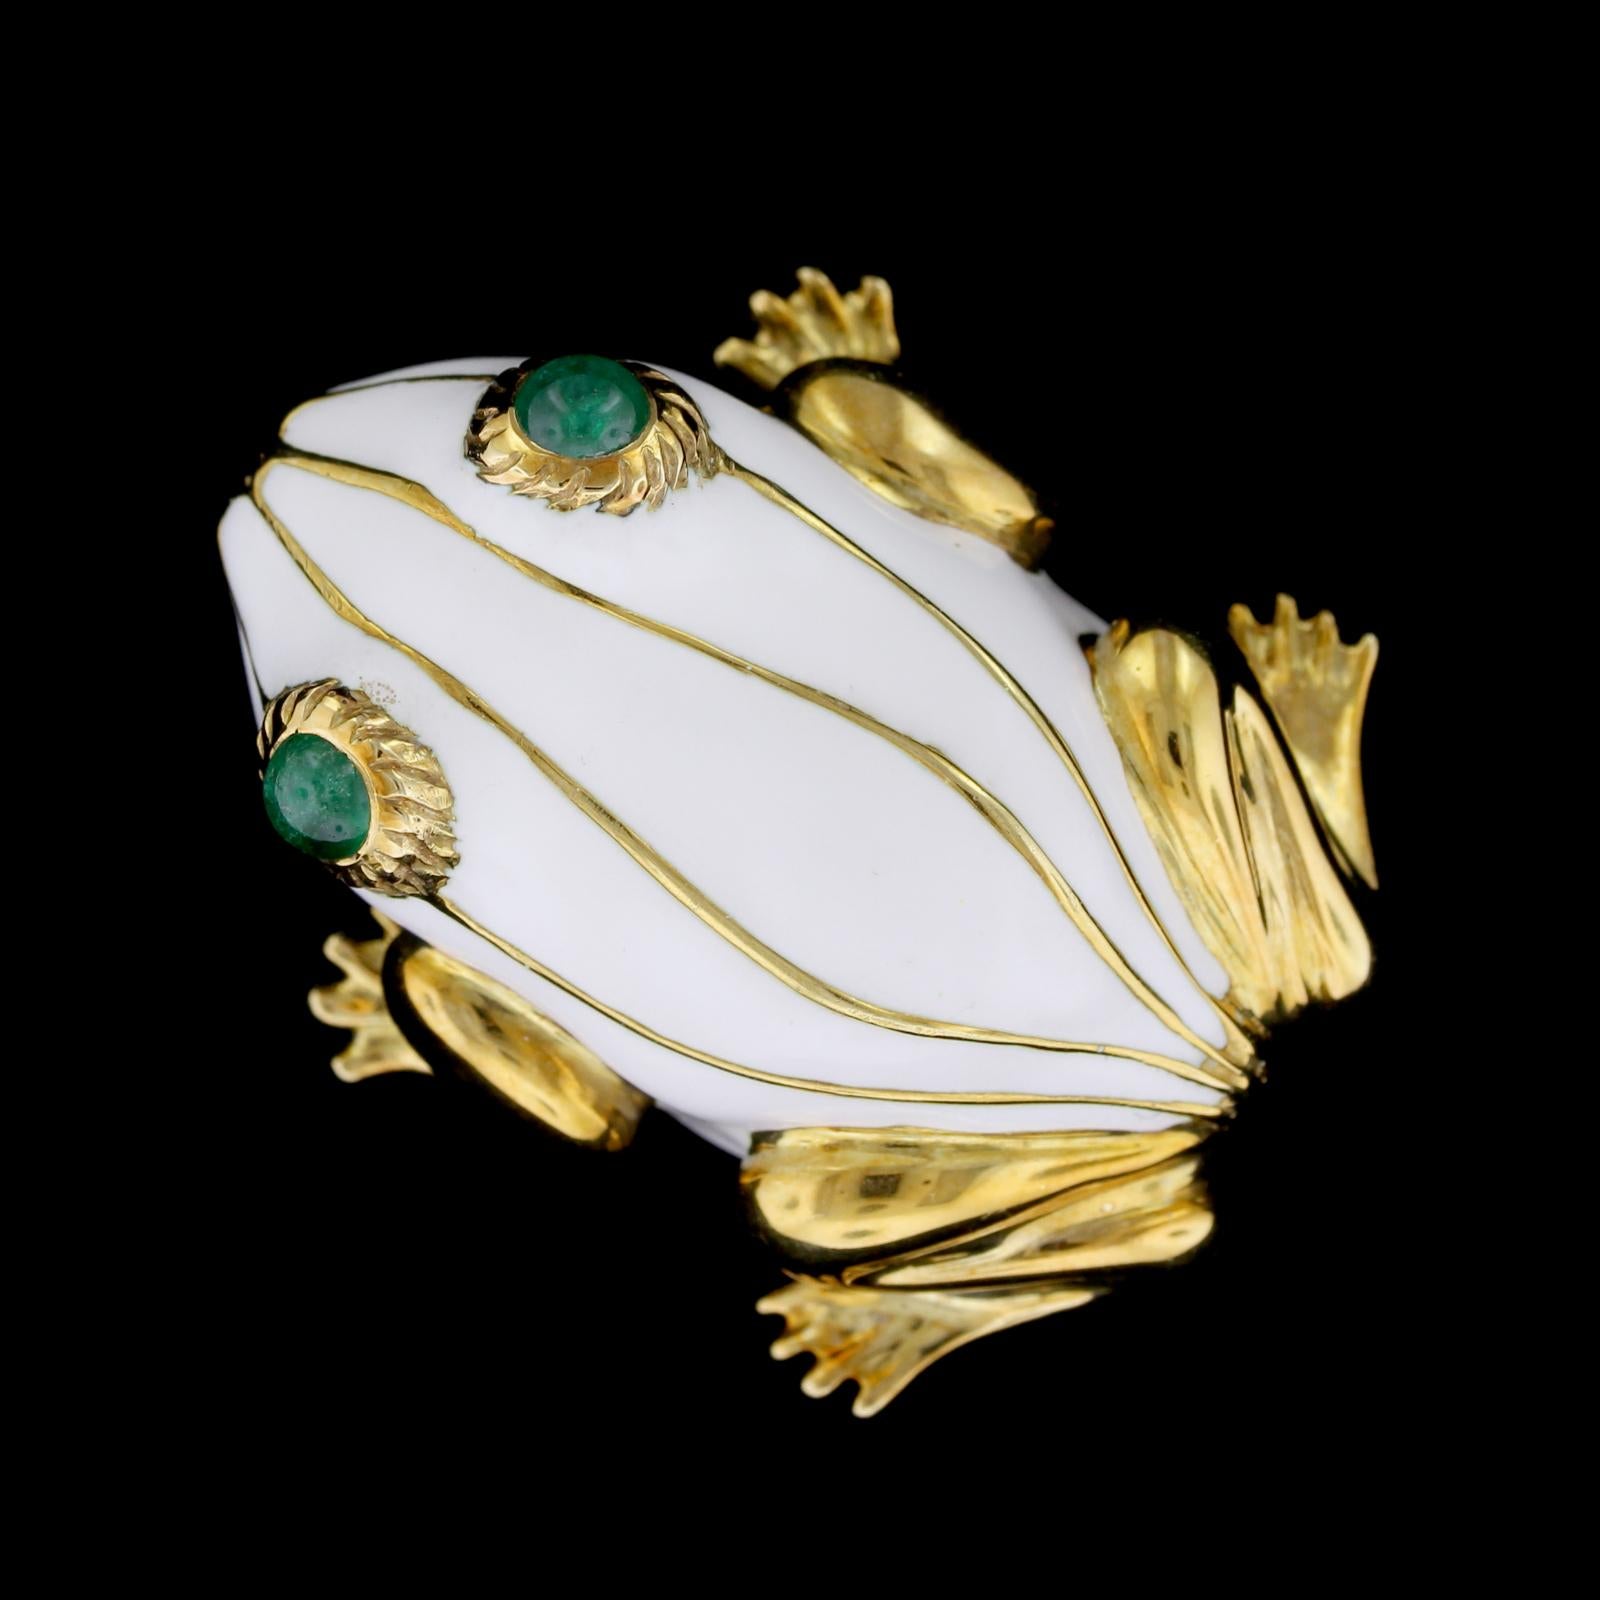 18K Yellow Gold White Enamel and Emerald Frog Brooch. The frog is designed with a
white enamel body and two round cabochon emerald eyes each measuring 4.00mm.,
width 1 1/4